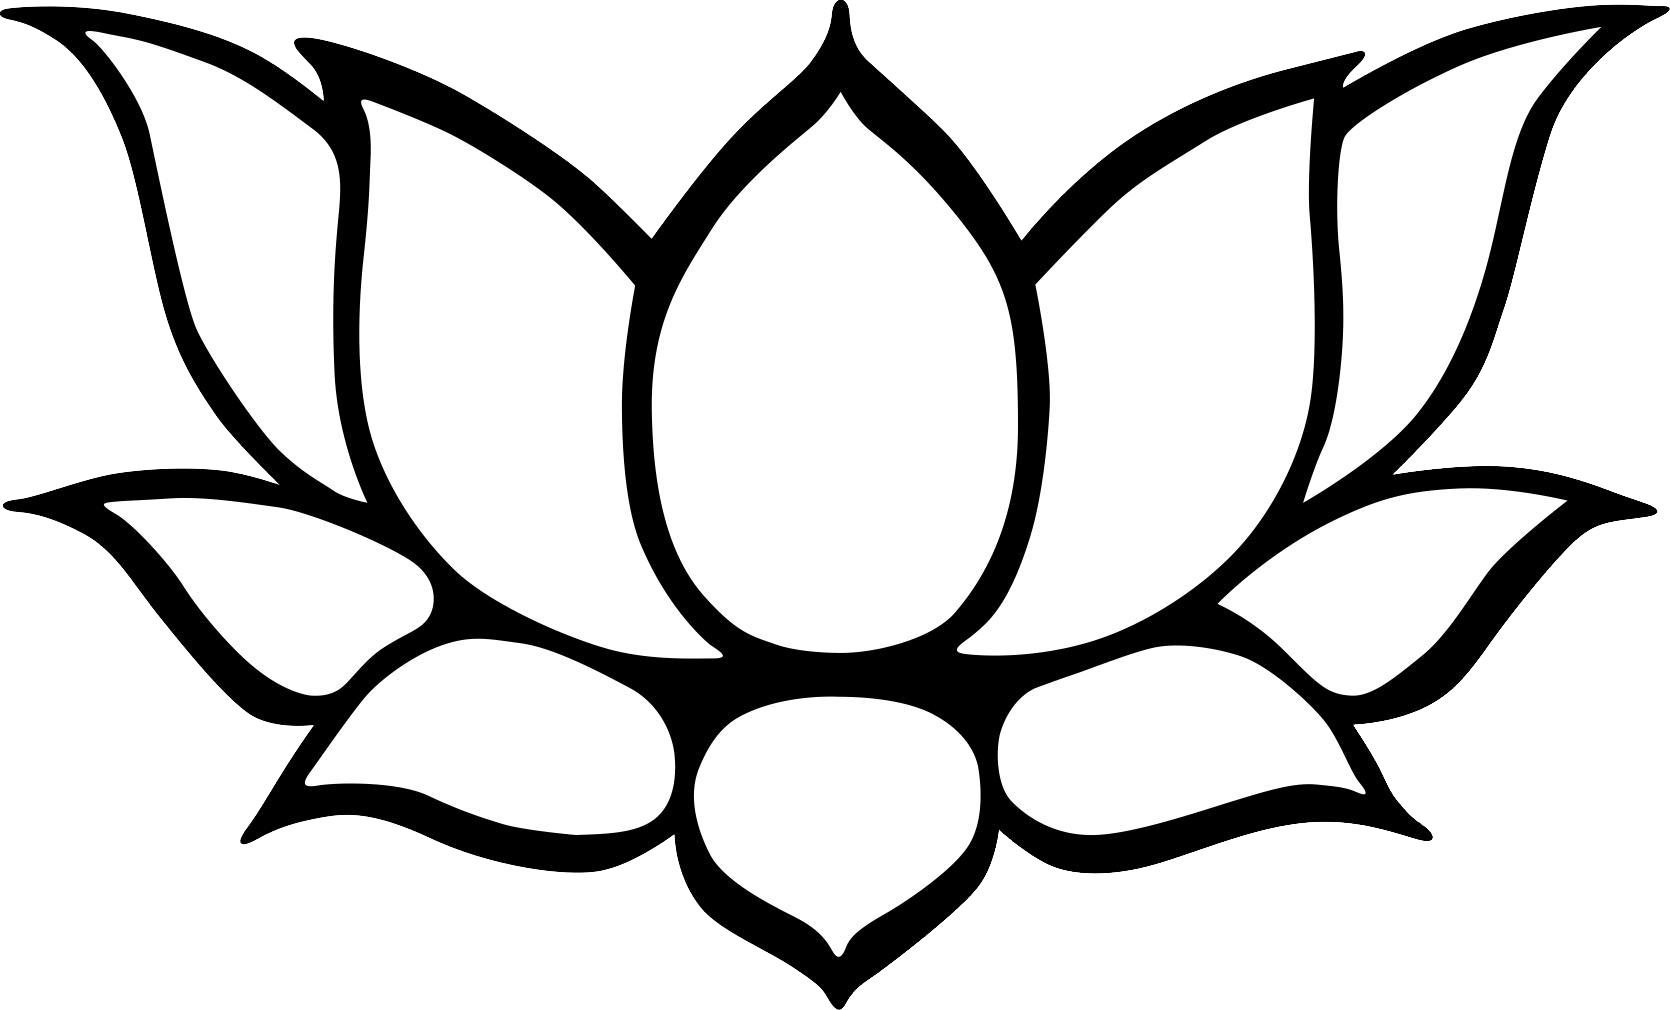 Lotus Line Drawing - Clipart library